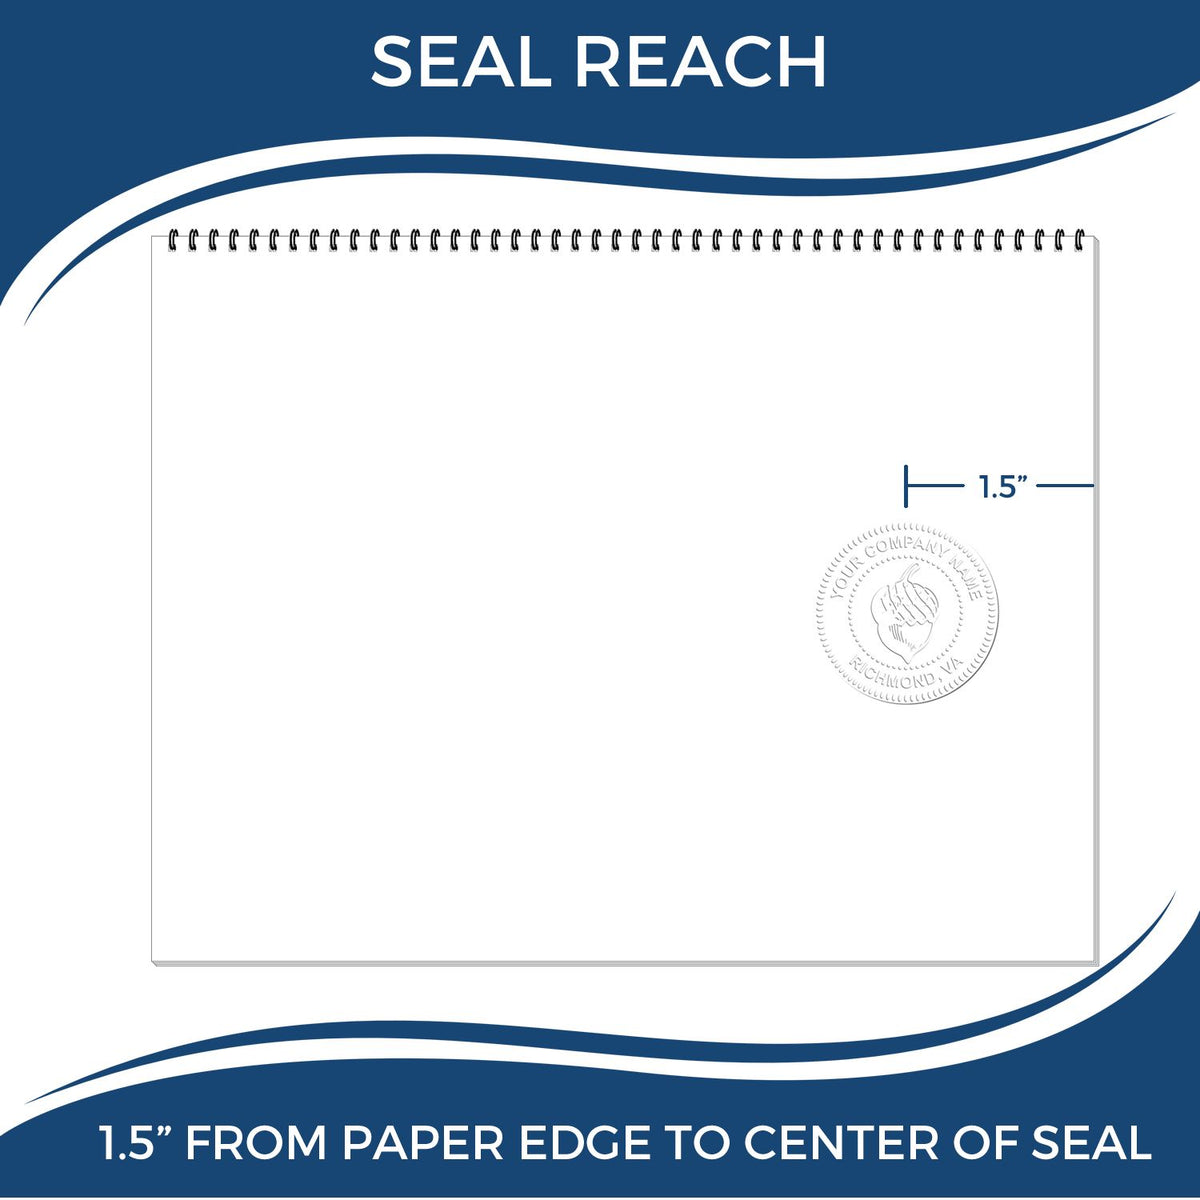 An infographic showing the seal reach which is represented by a ruler and a miniature seal image of the Handheld Alabama Architect Seal Embosser